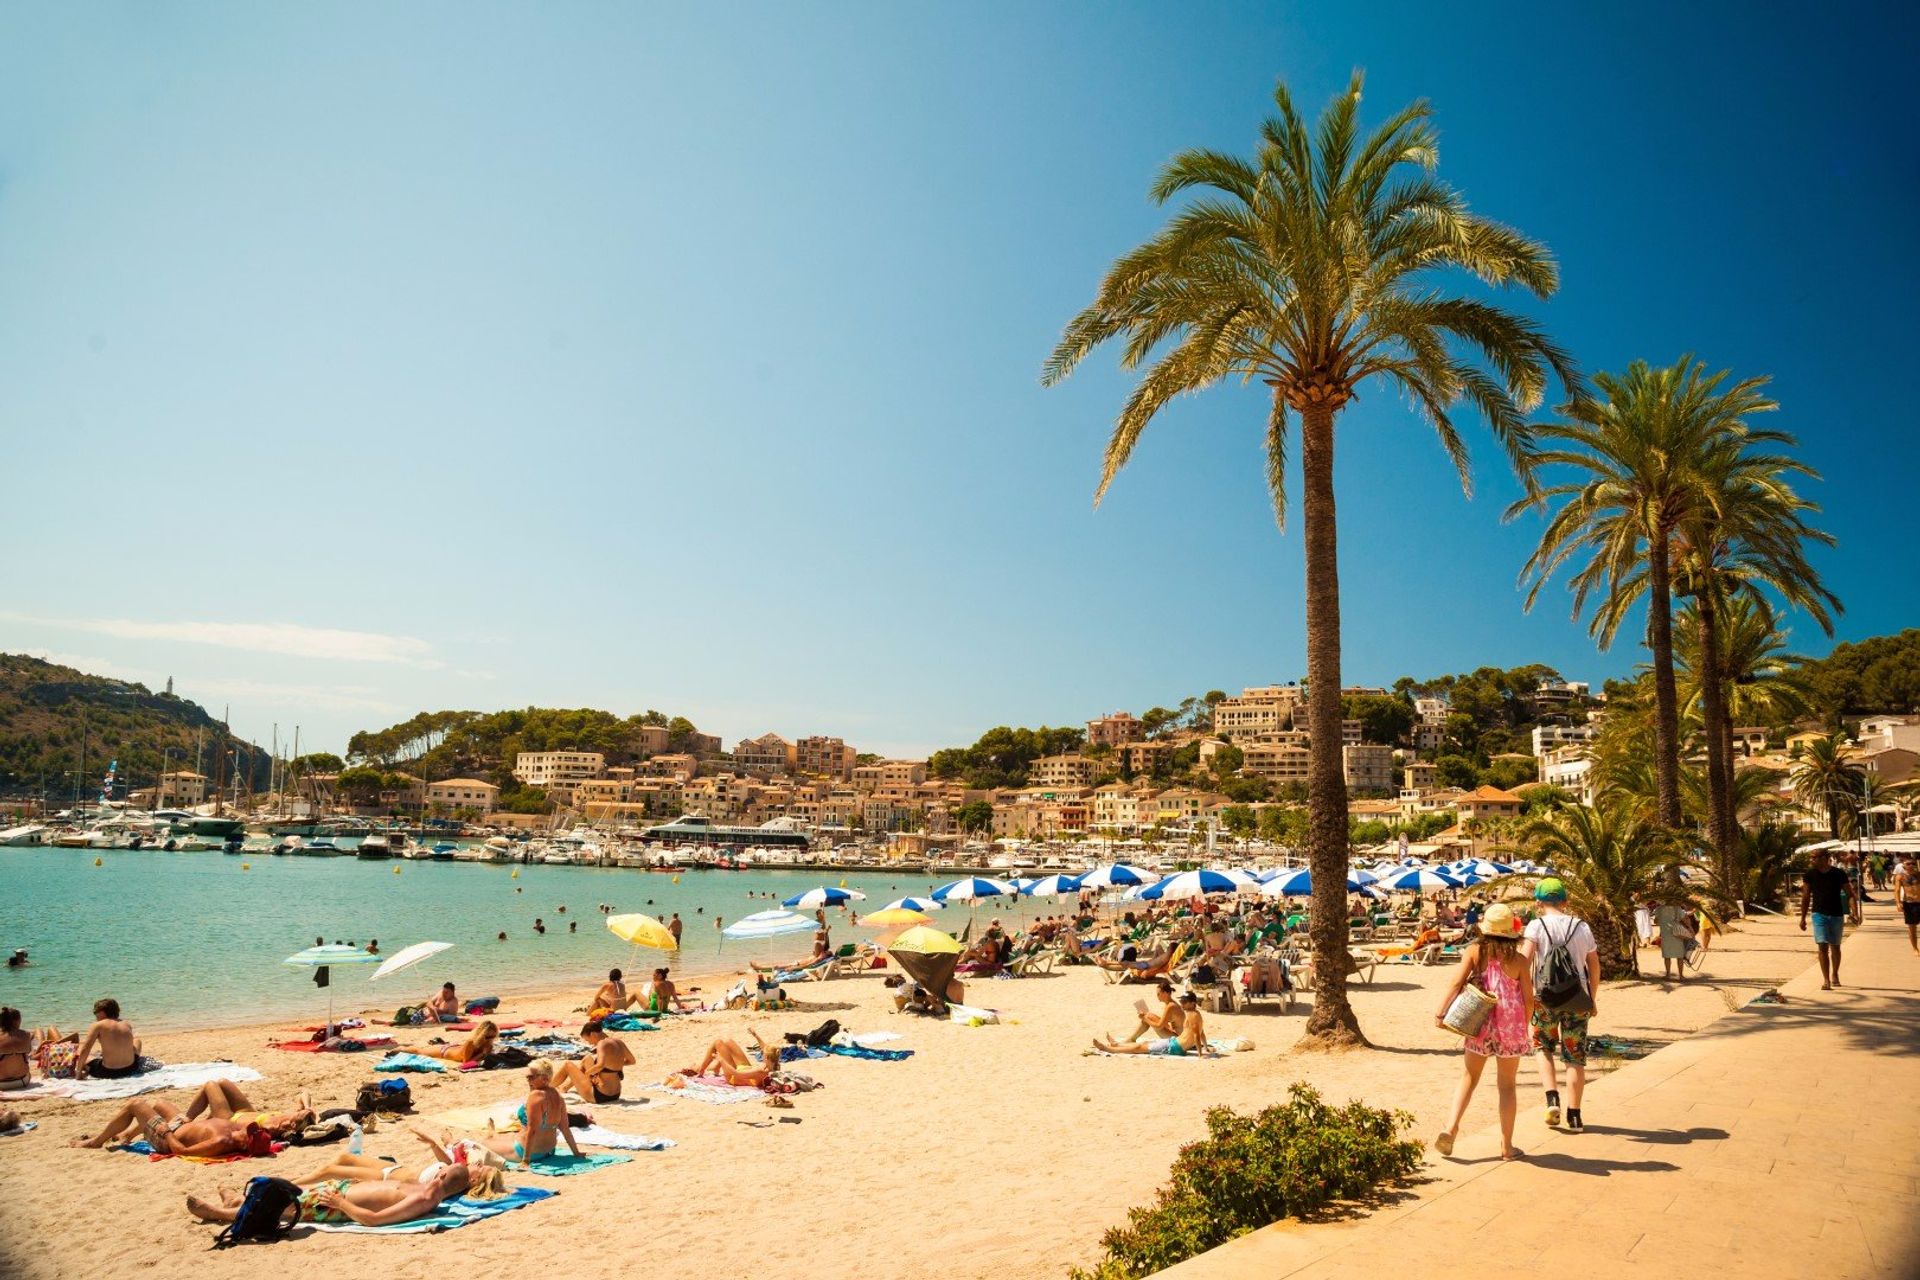 Sun, sea and relaxation in the heart of Port de Sóller